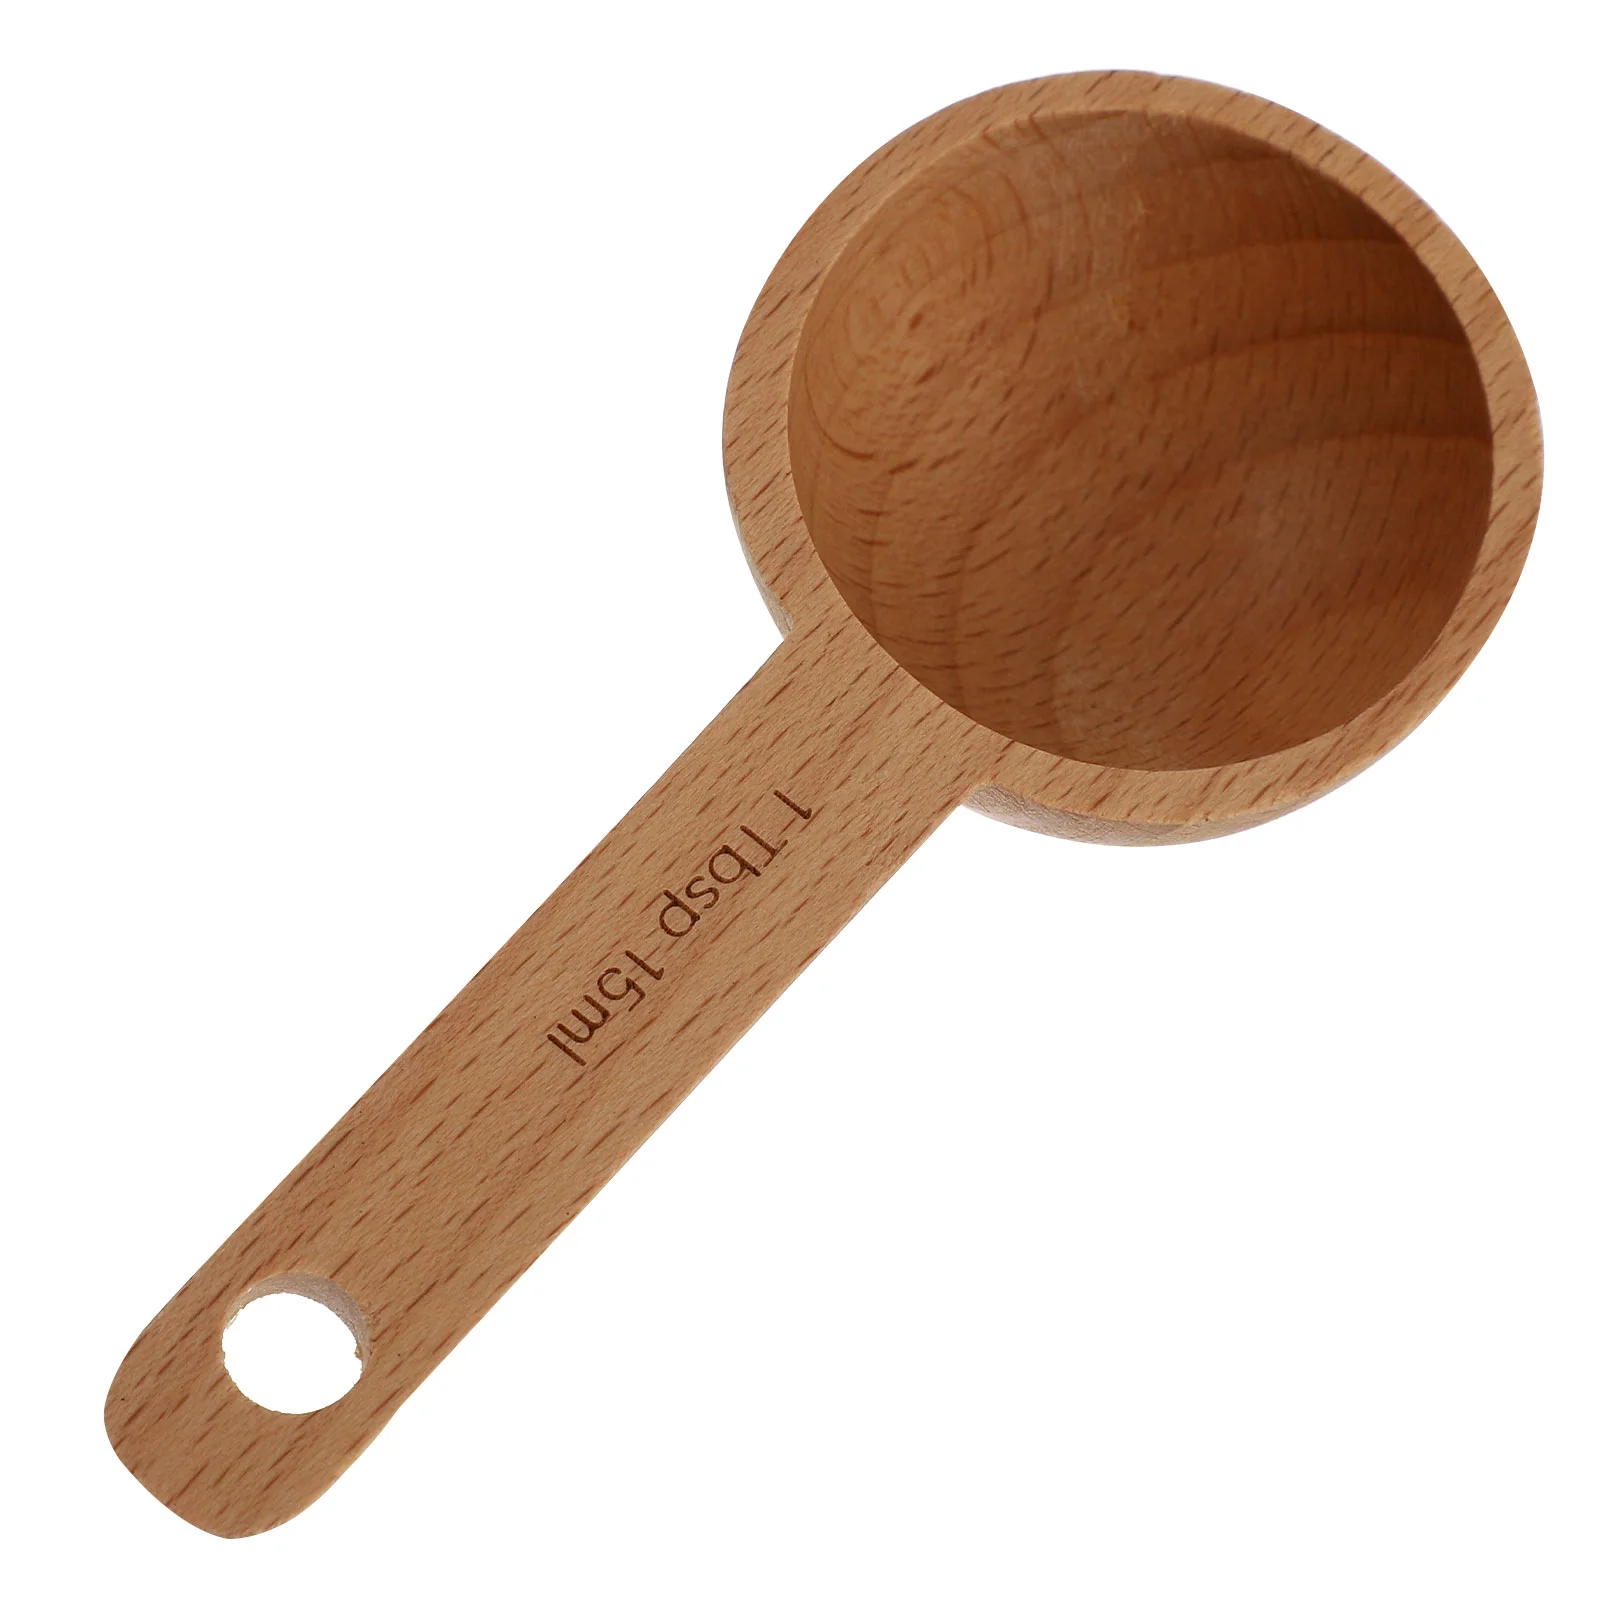 

Wooden Measuring Spoon Creative Tool Kitchen Sturdy Ingredient Sugar Durable Espresso Spoons